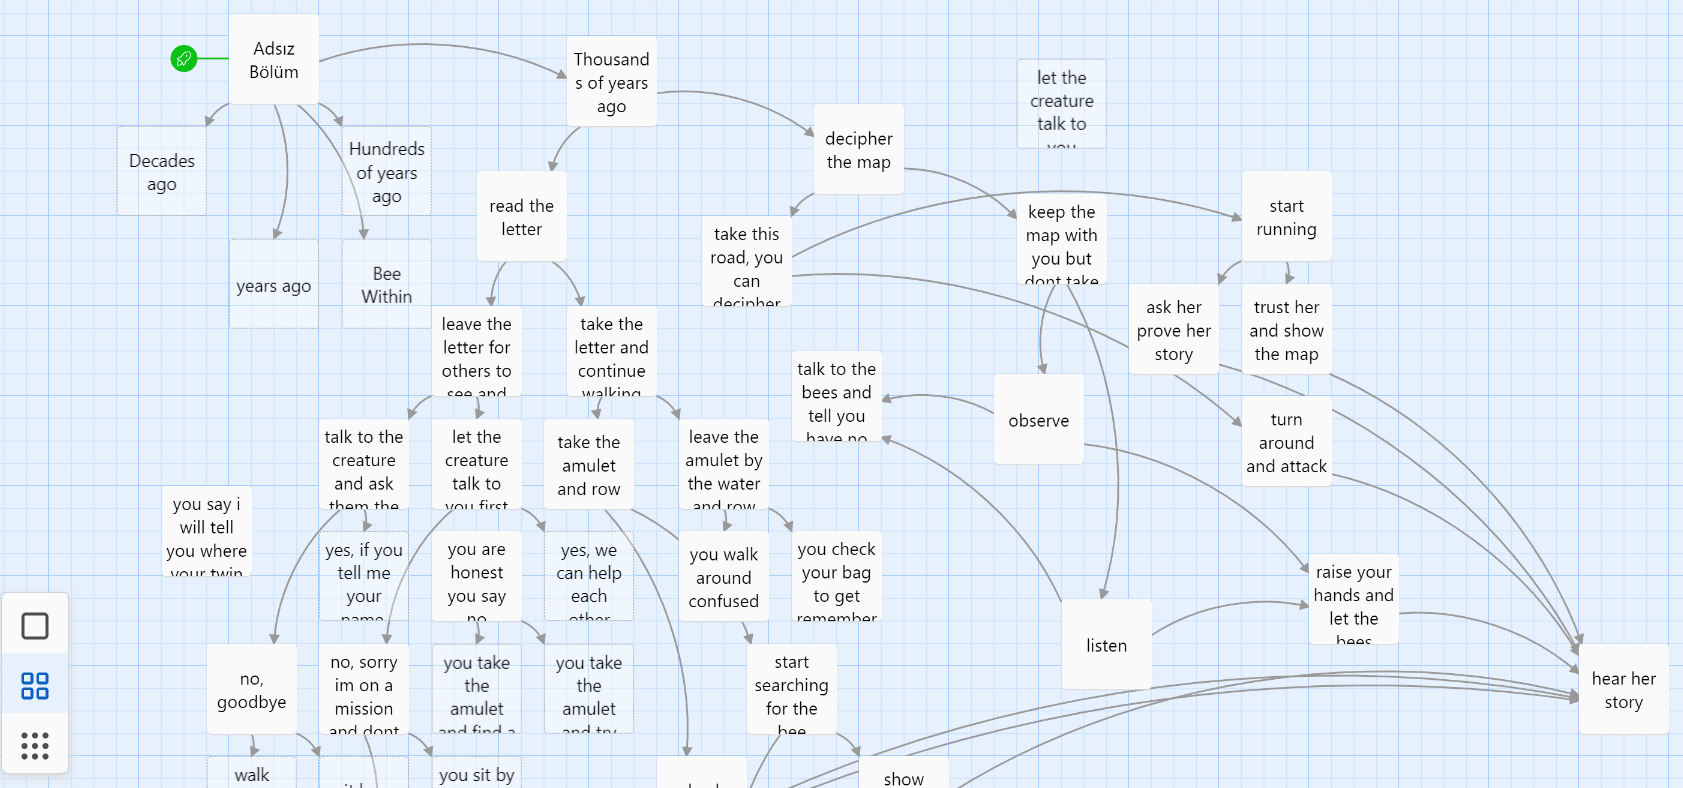 "The twine map of text based story, reachable from Bee Within by clicking to hear more about Gray the tree."